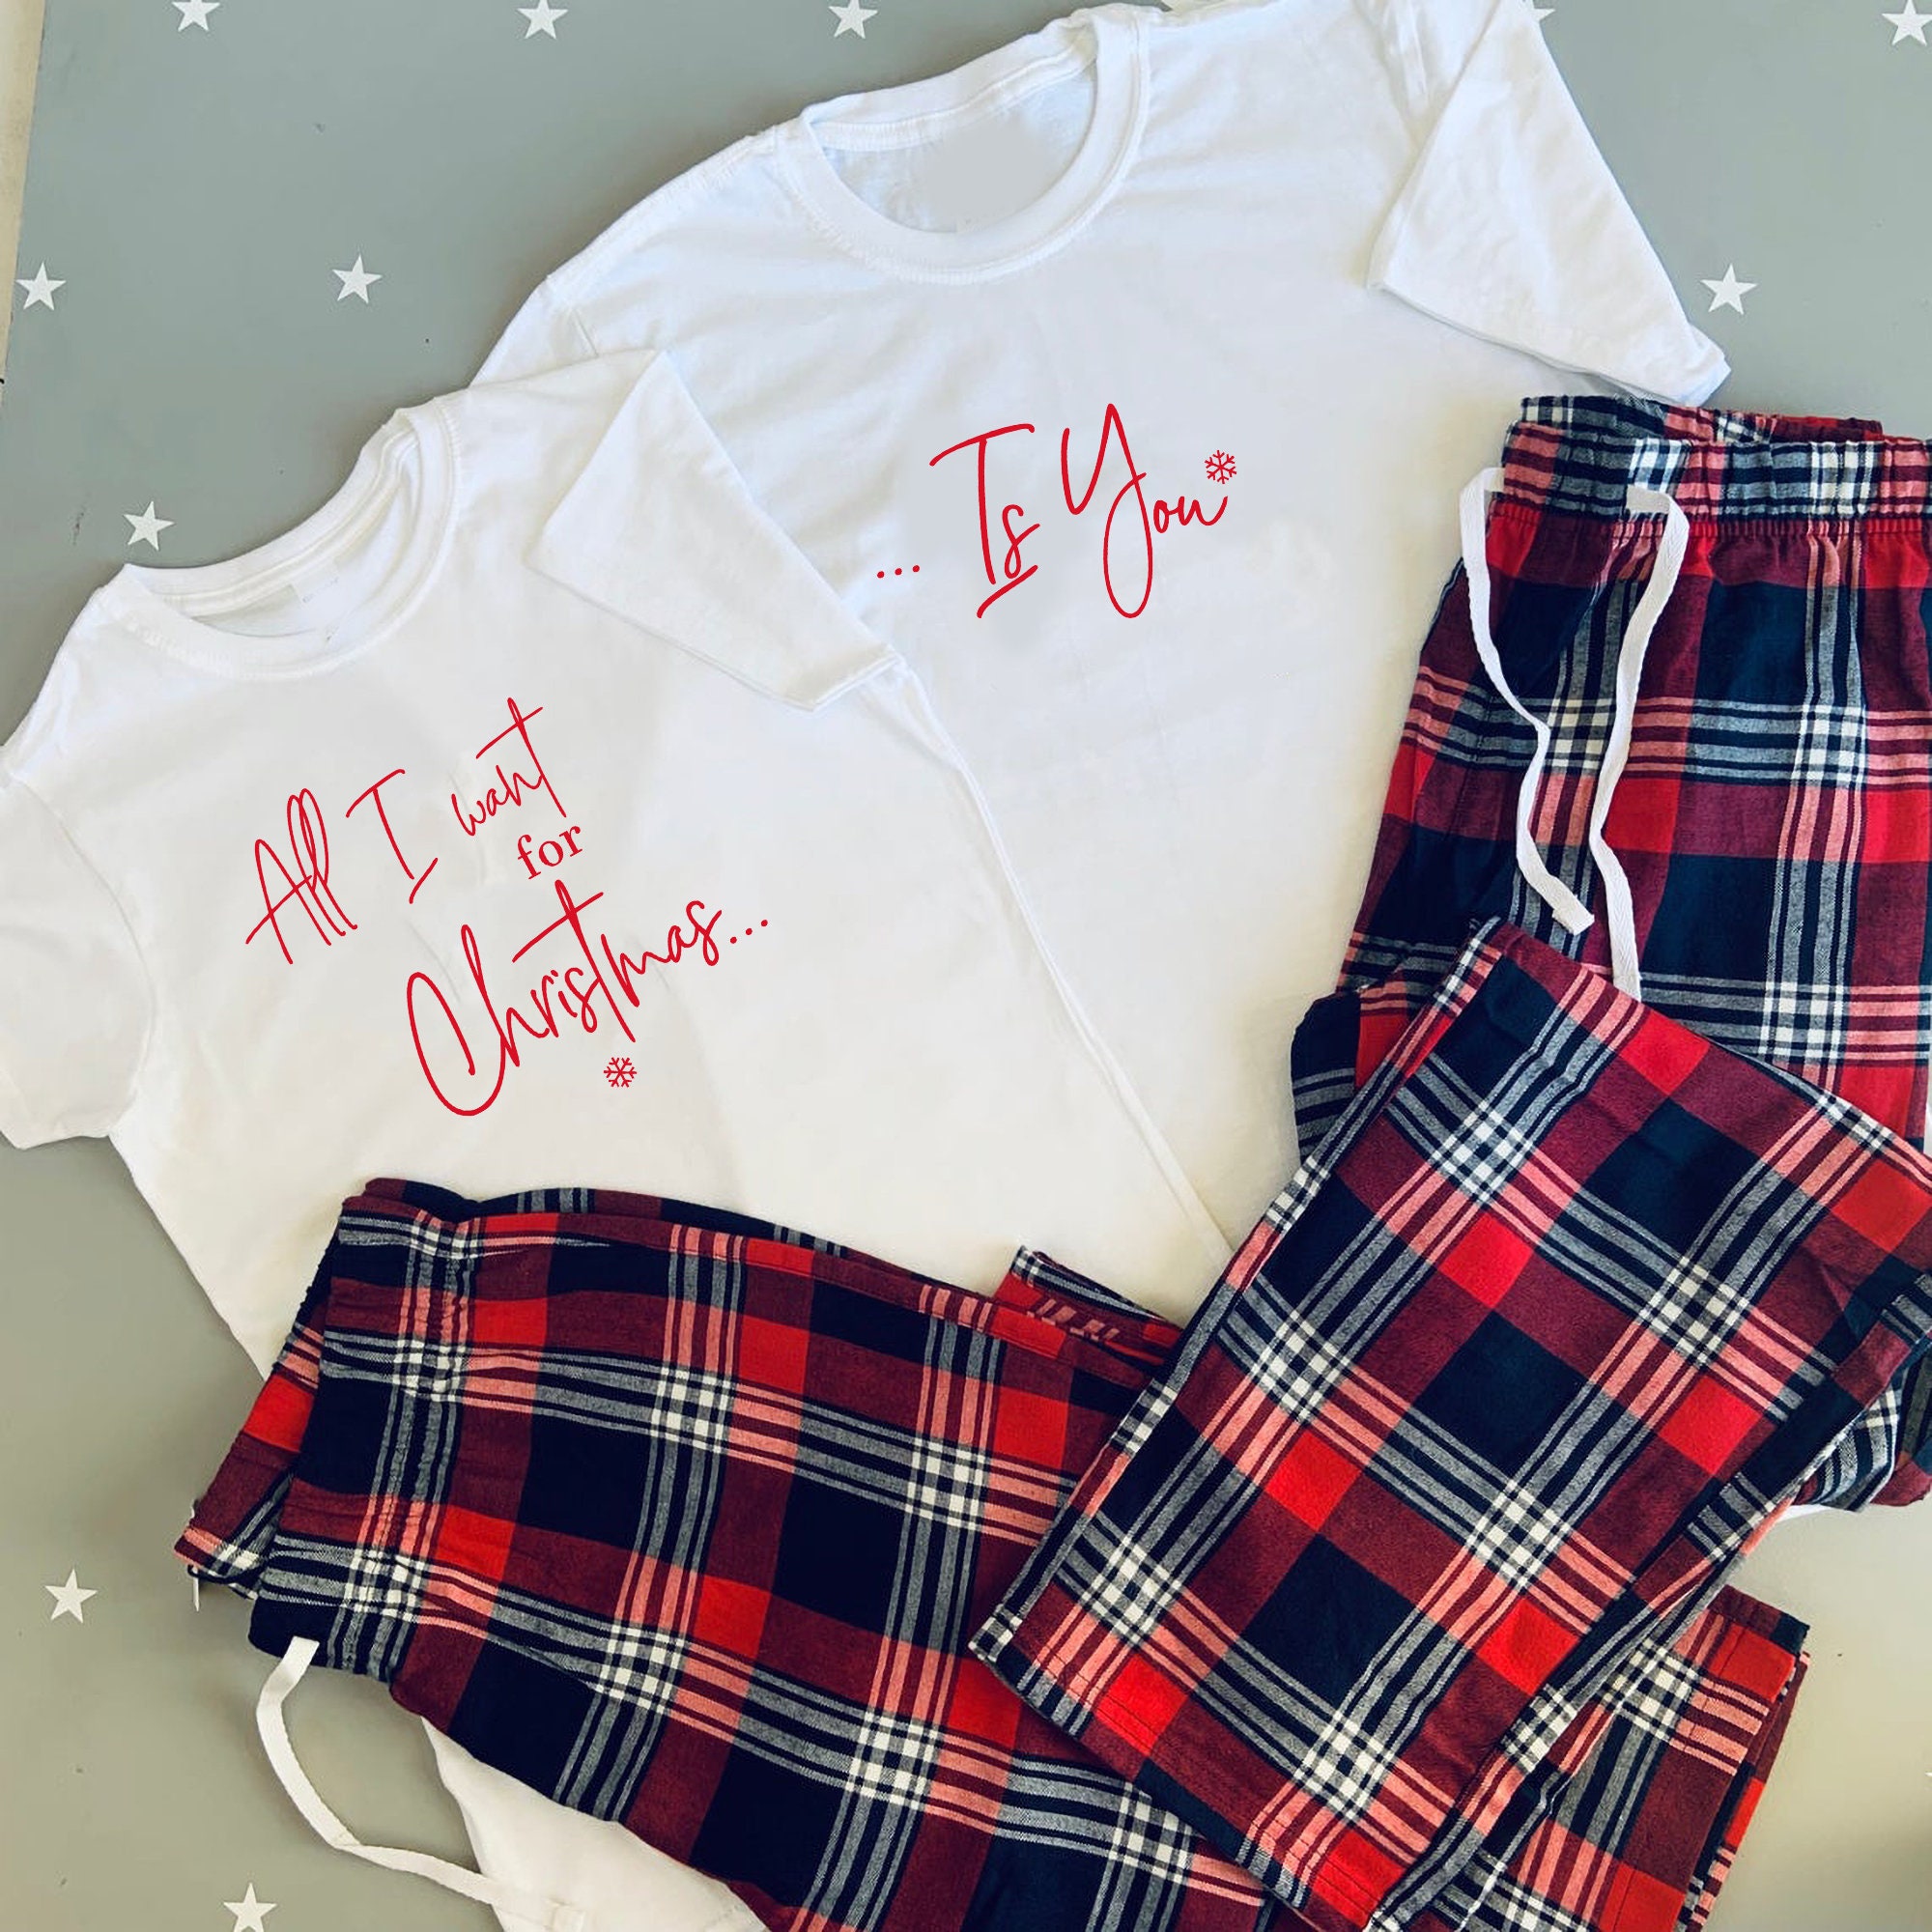 Flannel Pajama Pants Personalized With Your Mr and Mrs Name, Custom Flannel  Pj Pants, Matching Mr and Mrs Pajama Pants, Couples Shower Gift -   Canada